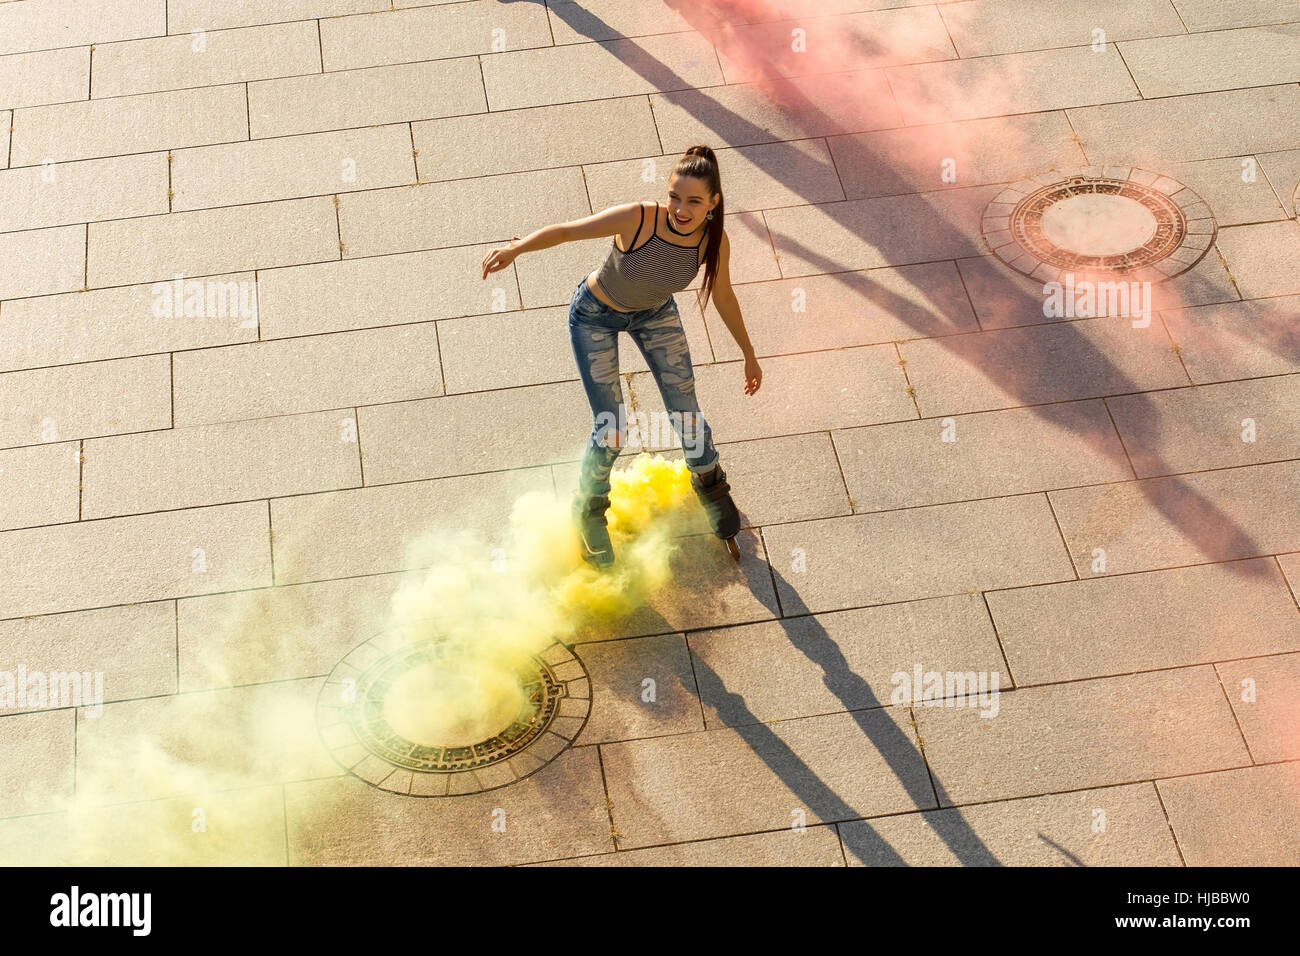 Young woman on rollerblades. Stock Photo